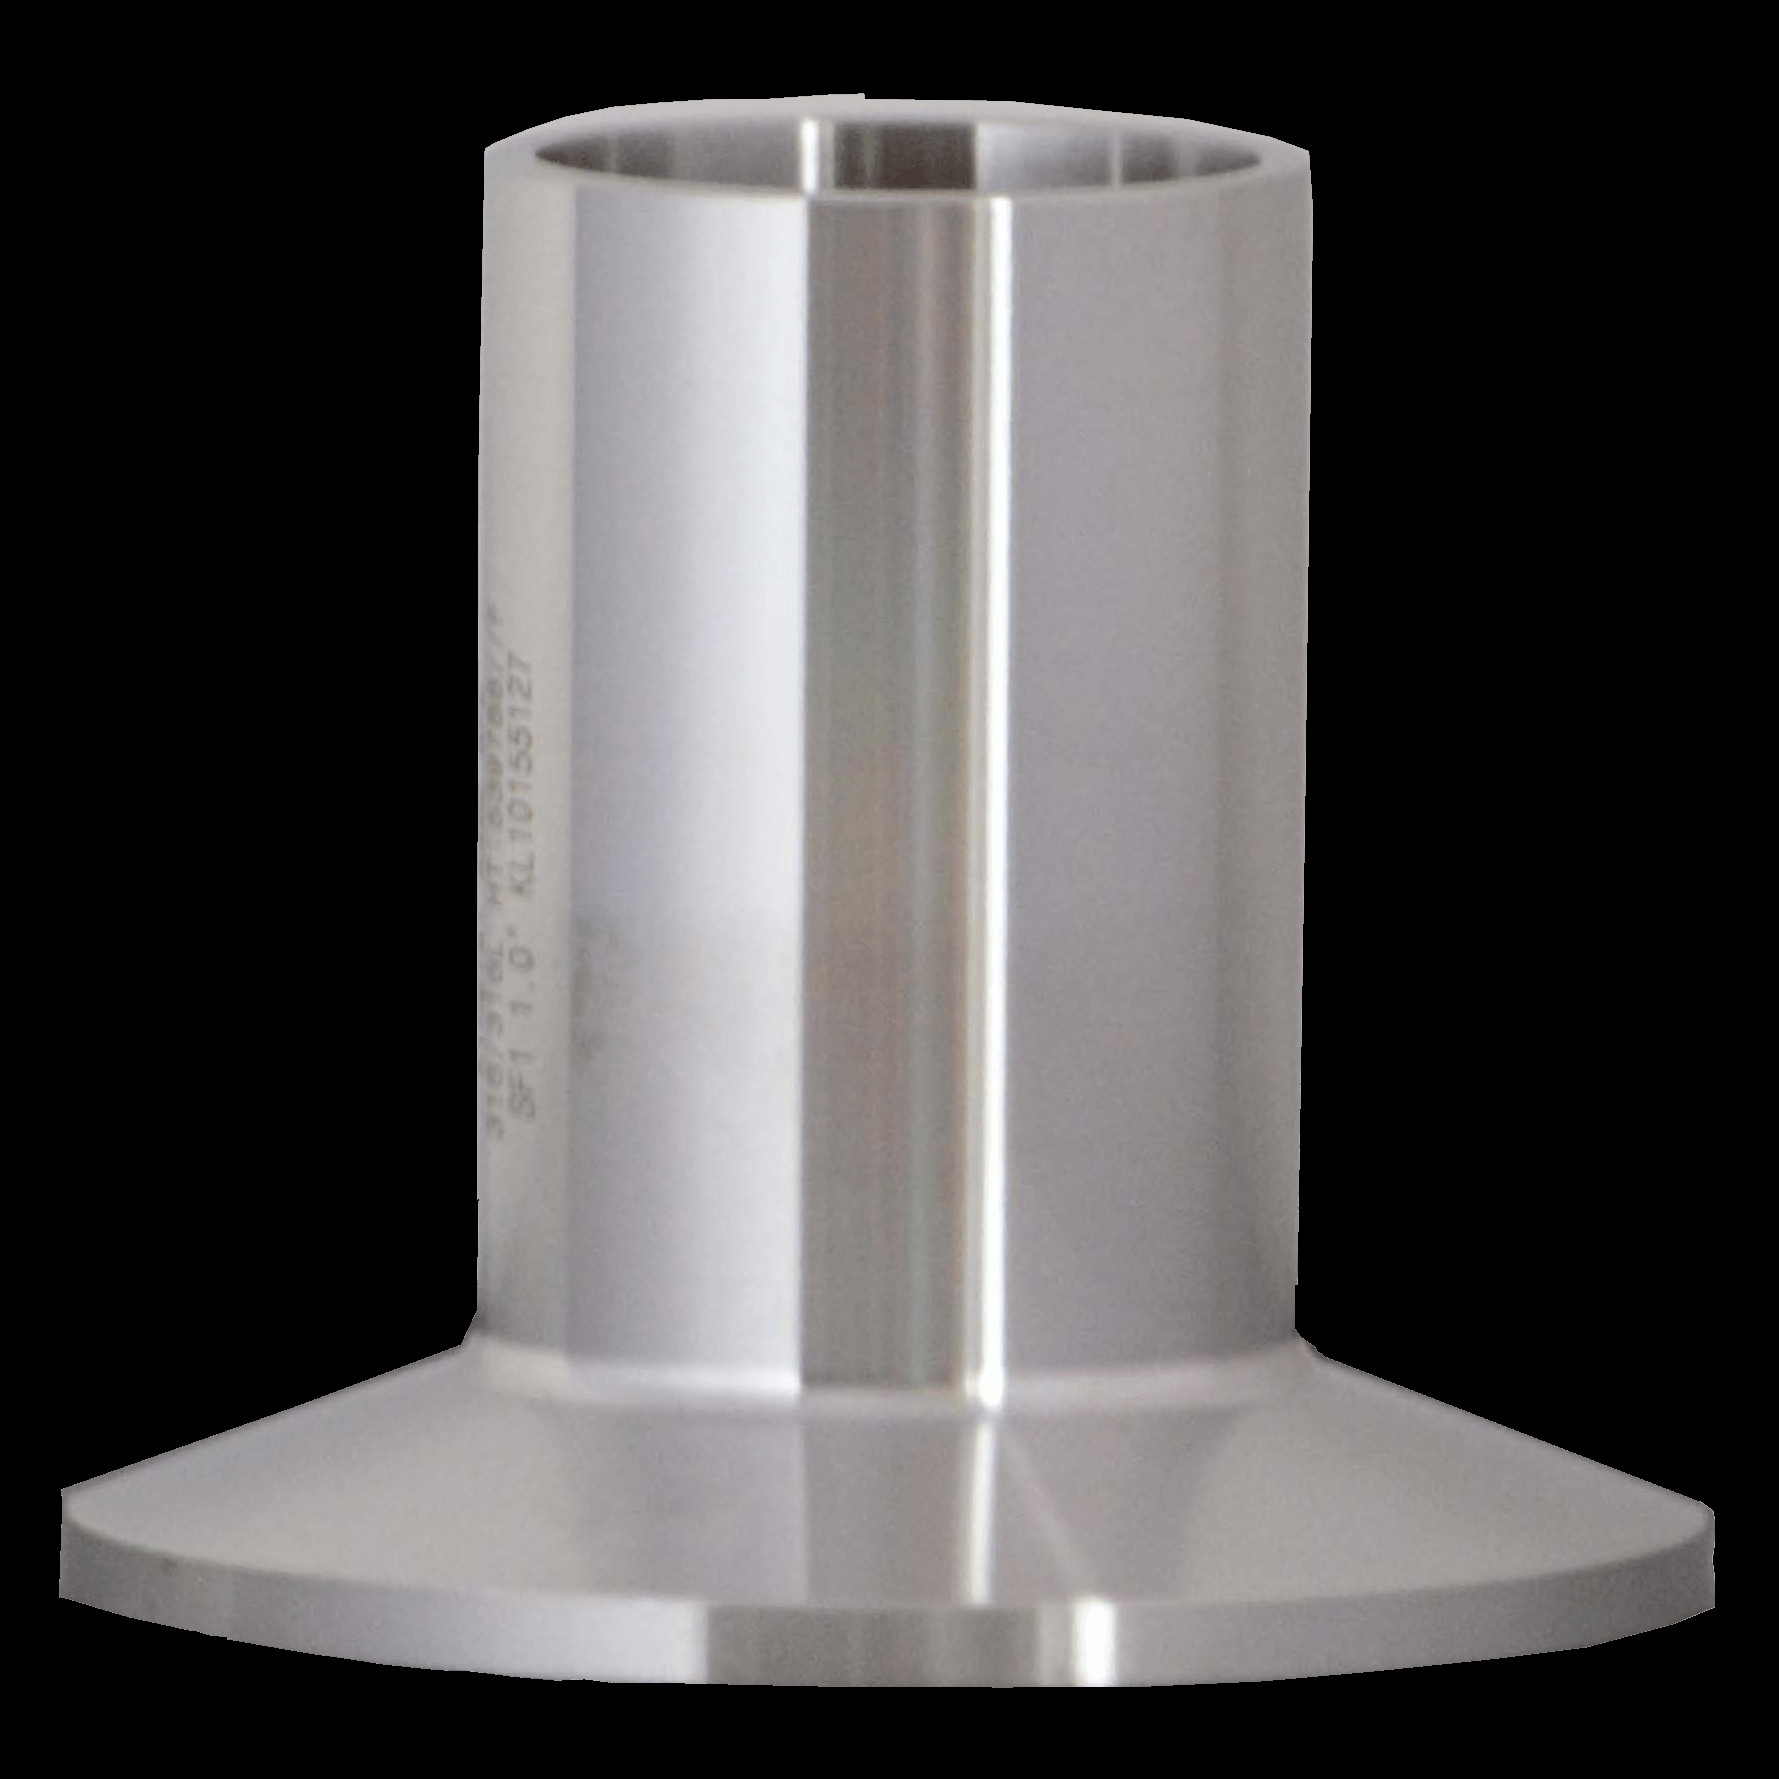 23 Cute Montreux Crystal Vase 2024 free download montreux crystal vase of tl14am7 1 1 2e280b3 ferrule clamp end x weld end bpe 316l 20ra id 32ra within tl14am7 1 1 2 ferrule clamp end x weld end bpe 316l 32ra